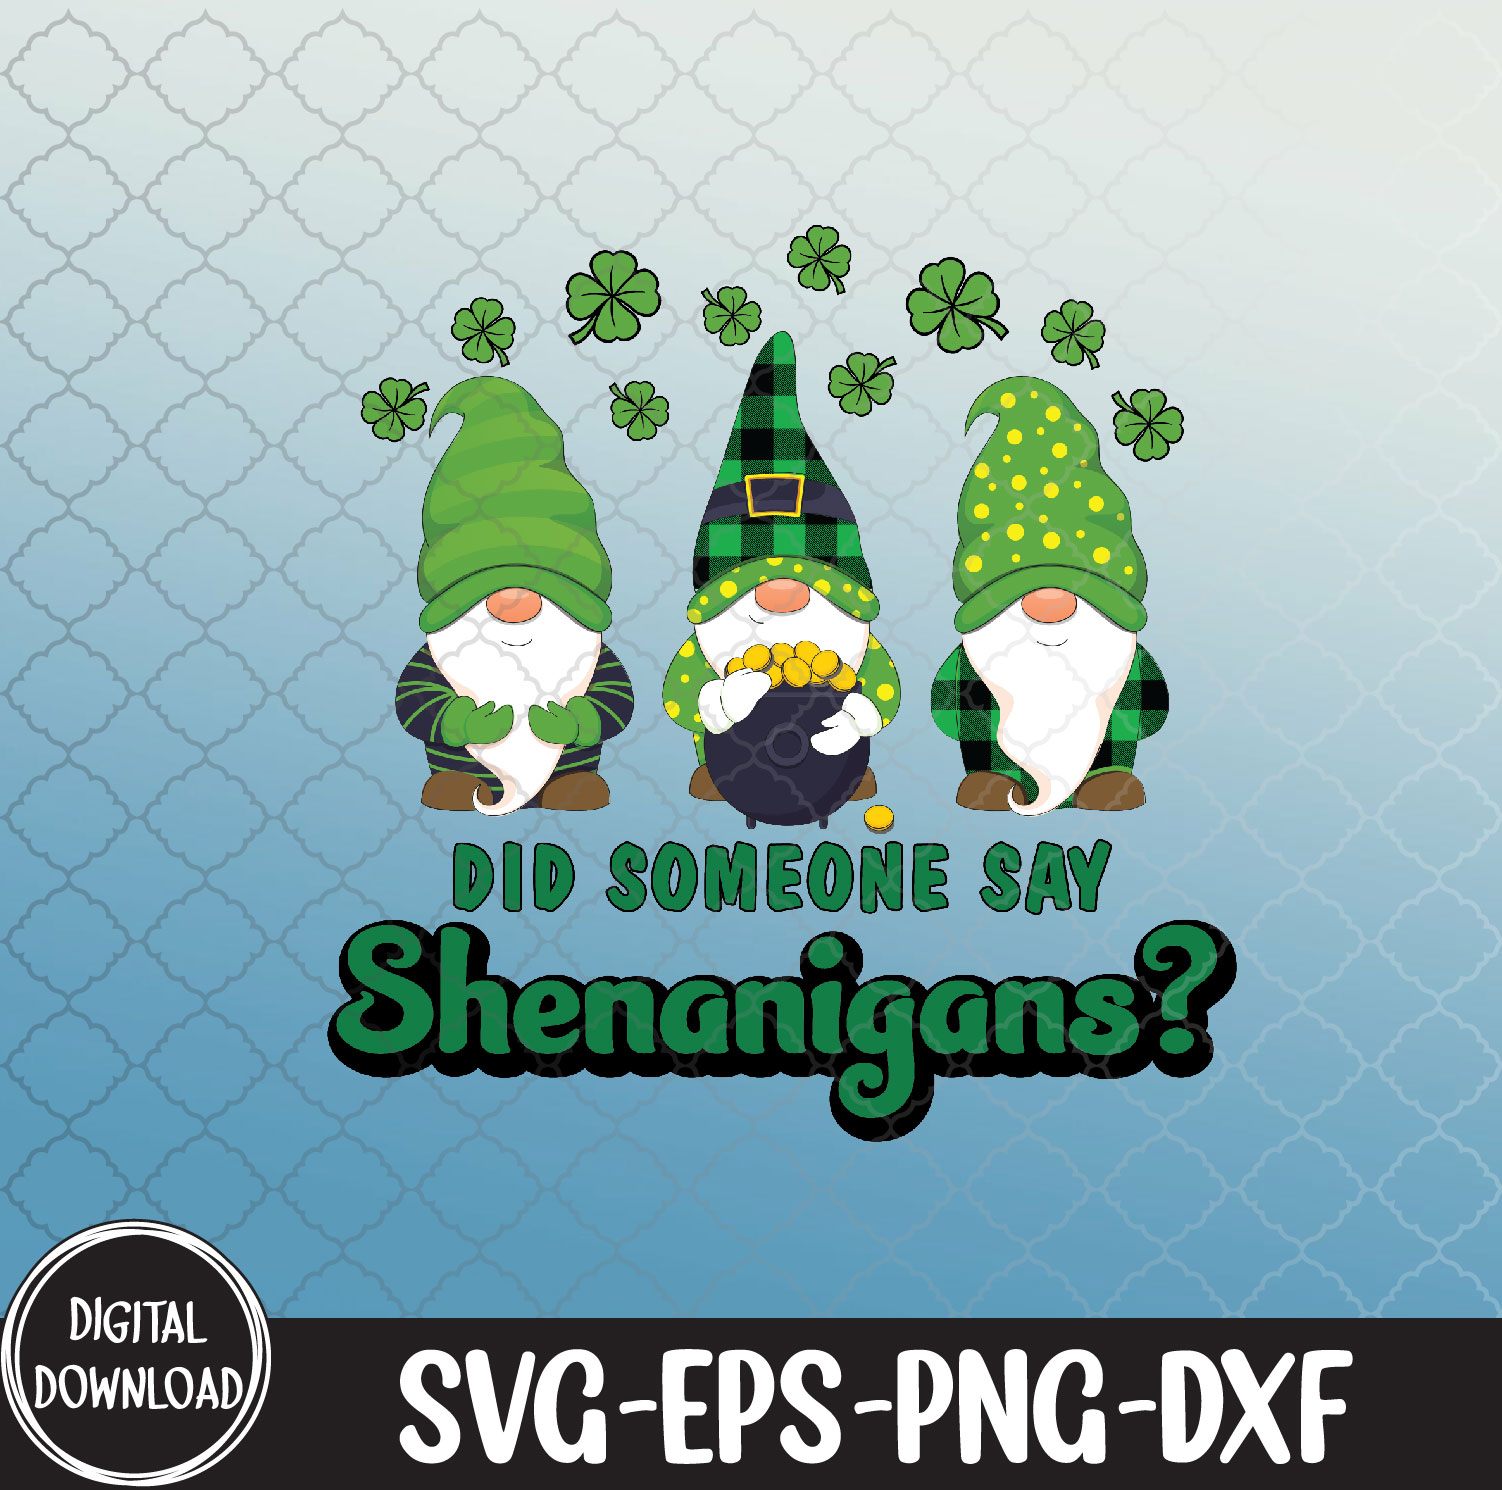 WTMNEW9file 09 70 St Patricks day gnomes, funny clover shenanigans gnome St Patricks DaY svg Happy St Patricks Day Svg, Eps, Png, Dxf